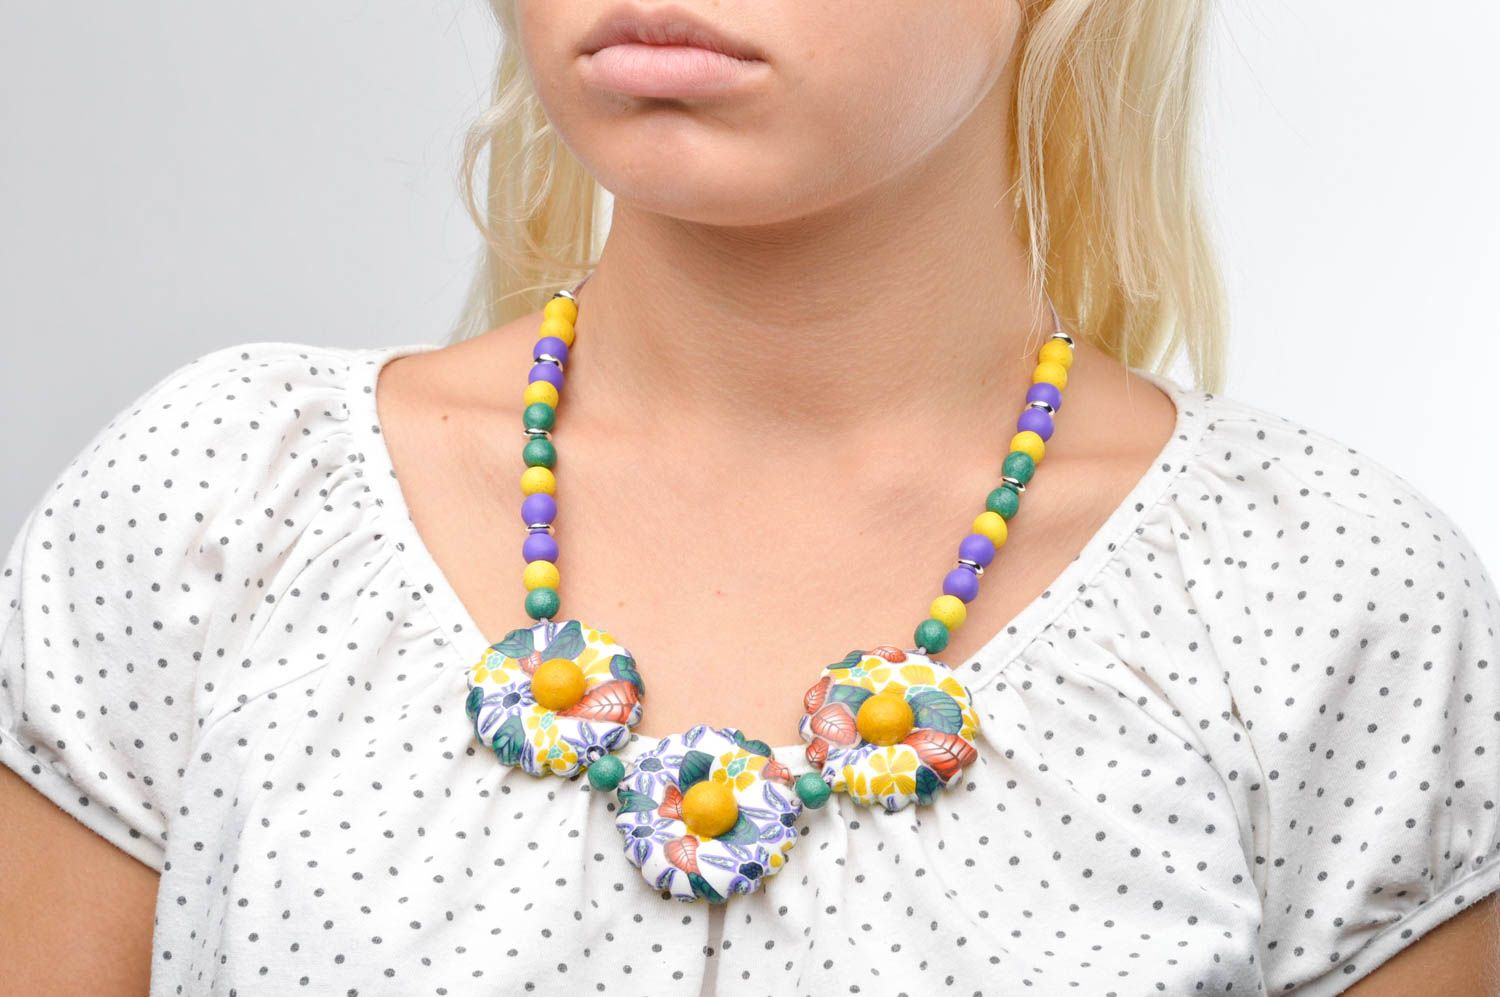 Stylish handmade necklace designs polymer clay ideas plastic necklace gift ideas photo 3